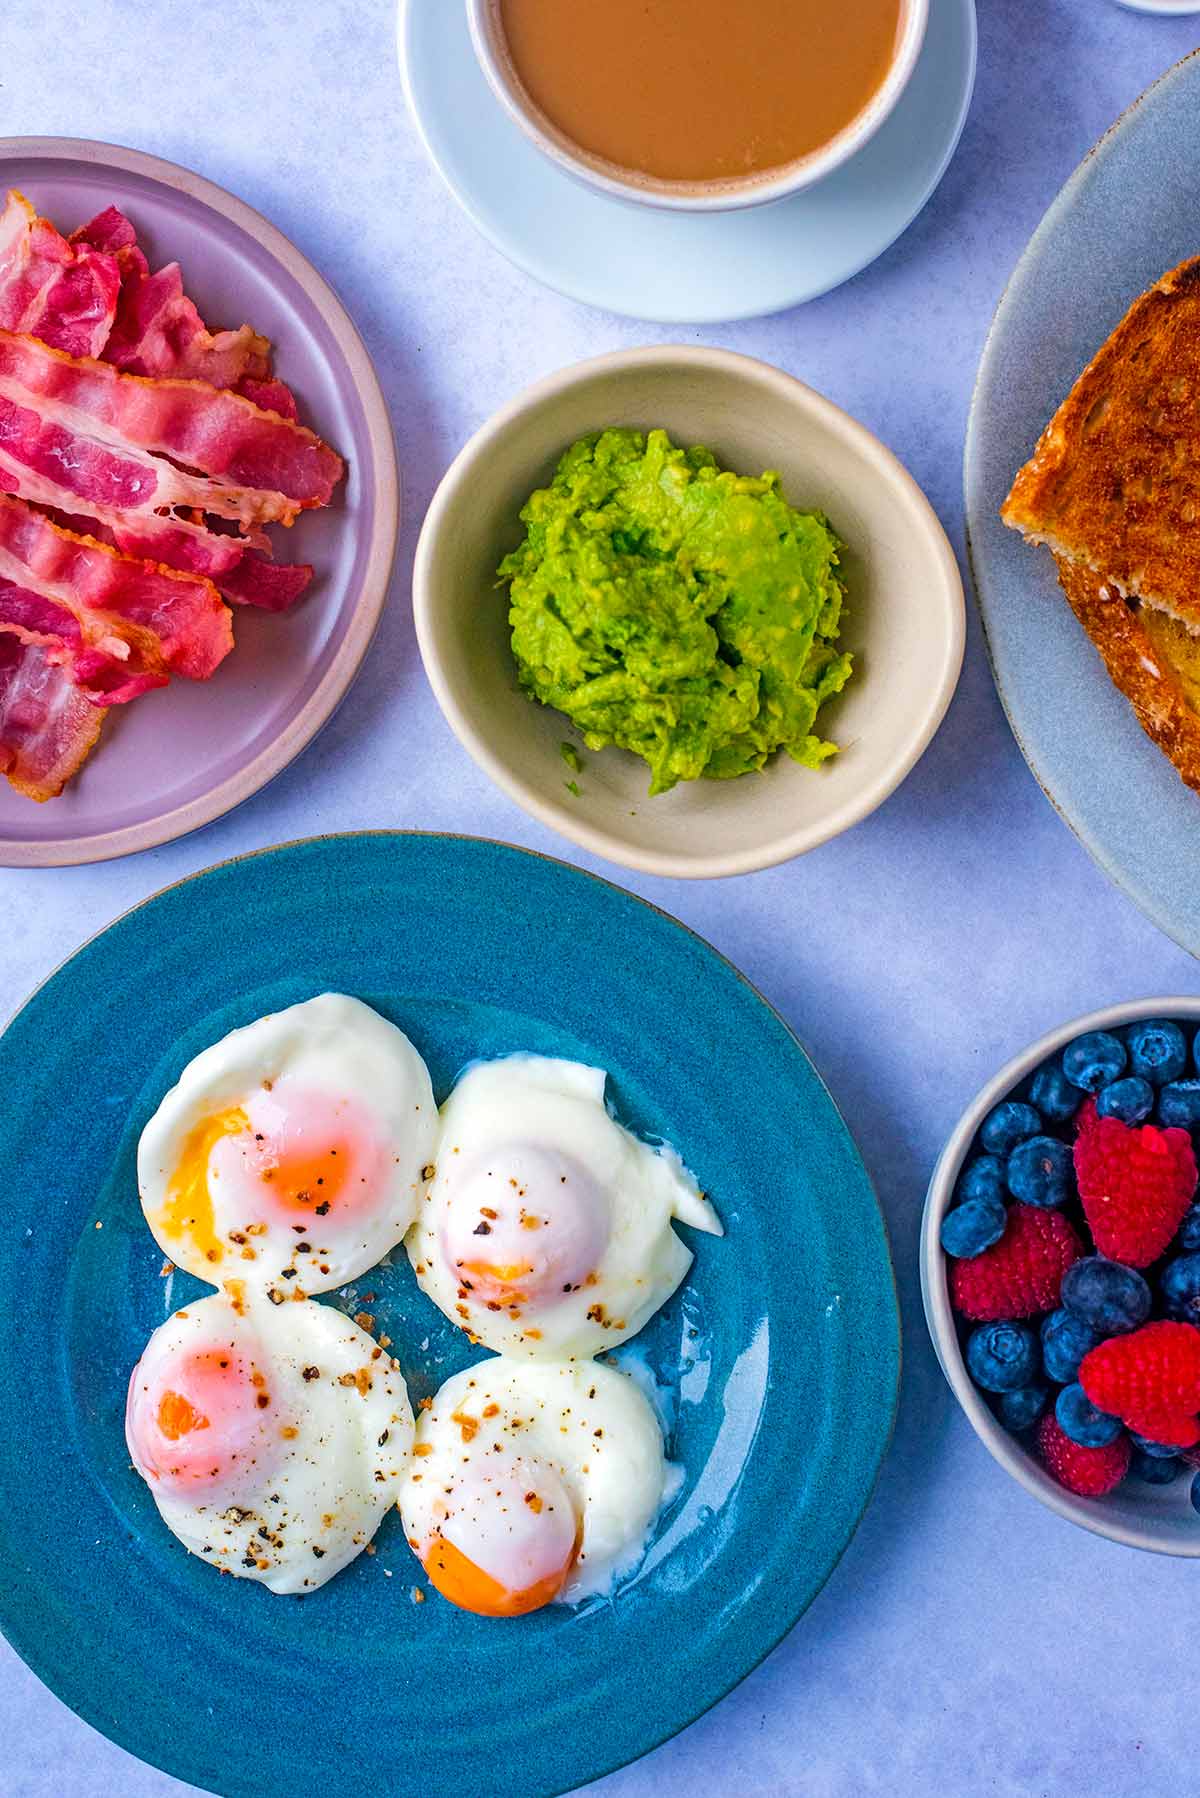 Plates of toast, poached eggs and bacon with bowls of smashed avocado and berries.